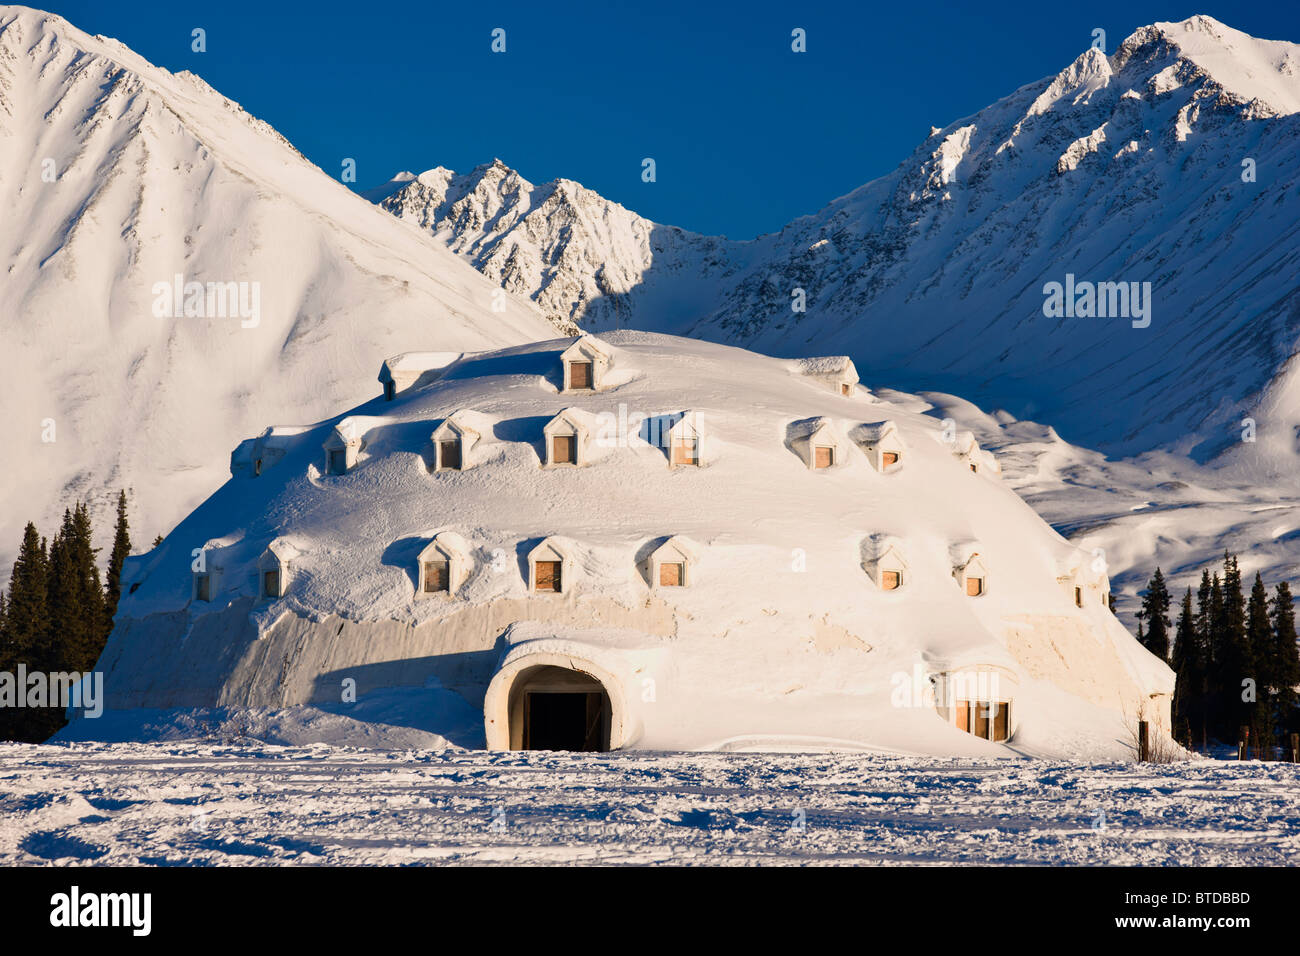 Igloo City, a uniquely Alaskan architectural icon located along the George Parks Highway near Broad Pass, Alaska, Winter Stock Photo